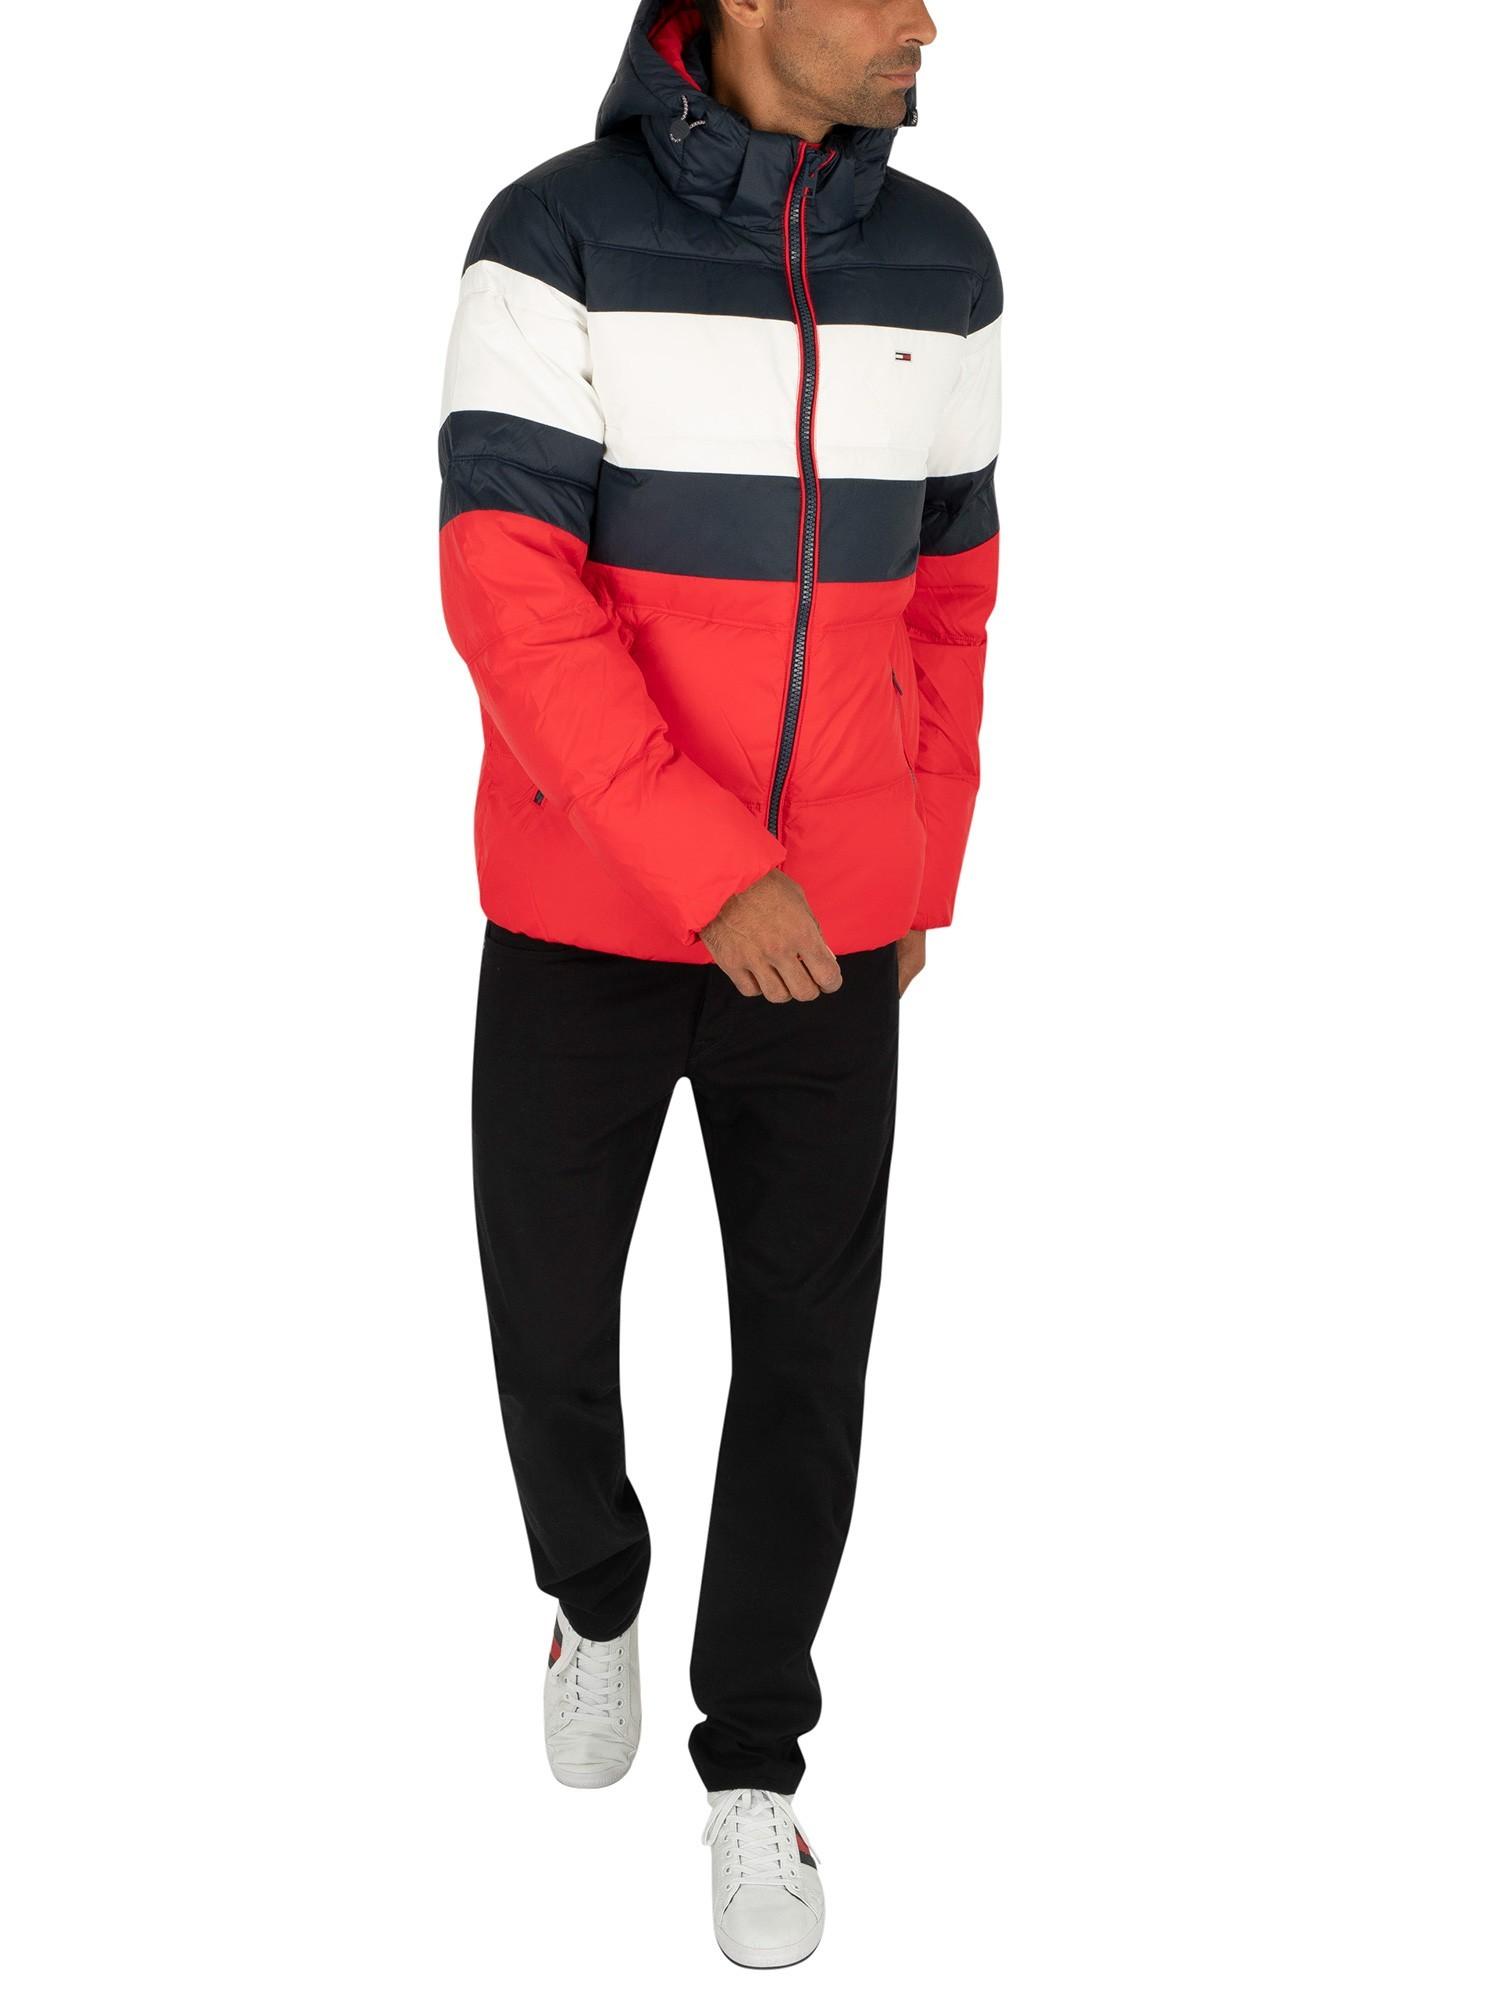 Tommy Jeans Rugby Stripe Puffa Jacket, Buy Now, Cheap Sale, 52% OFF,  www.ngny.tech